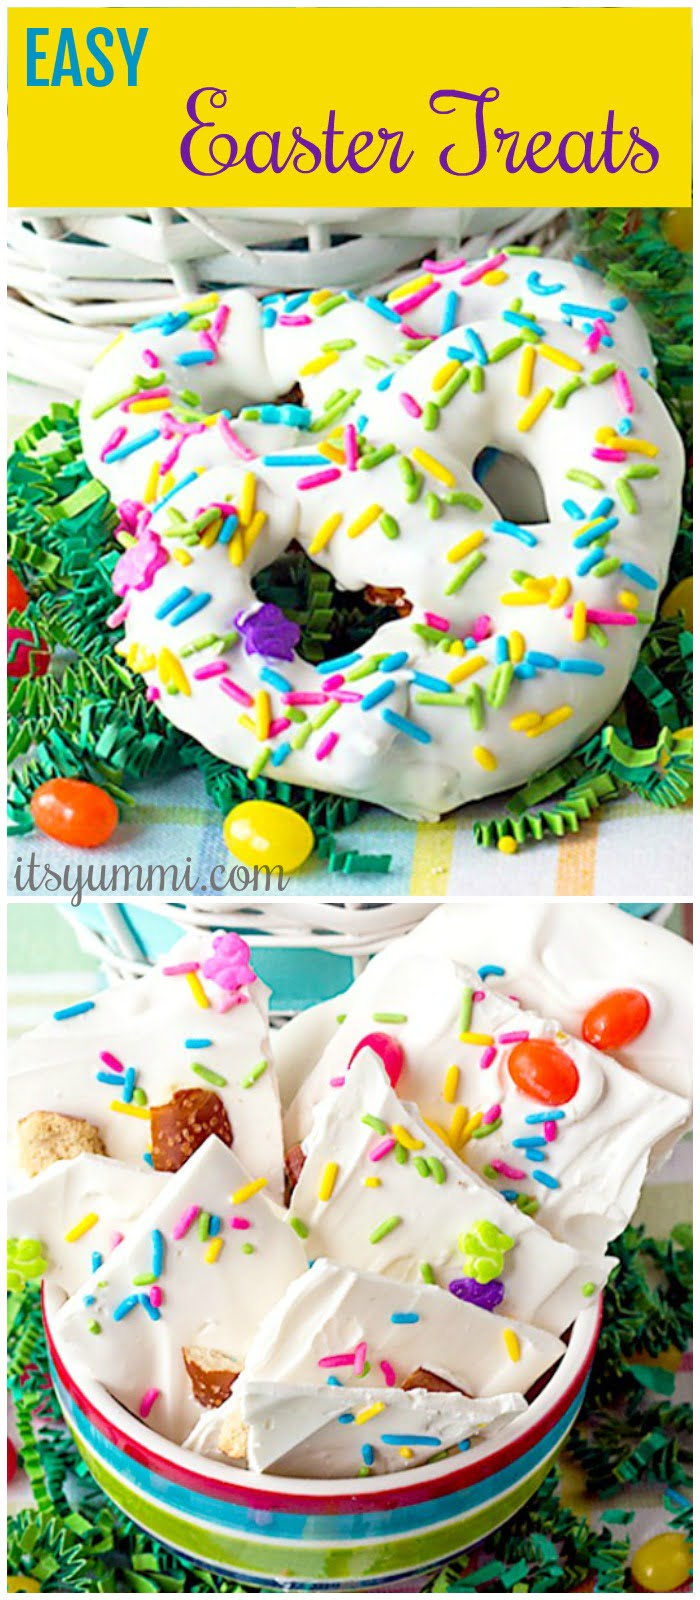 titled photo collage - Easy Easter Treats - collage shows a bowl of white chocolate Bunny bark and white chocolate covered pretzels with colored sprinkles